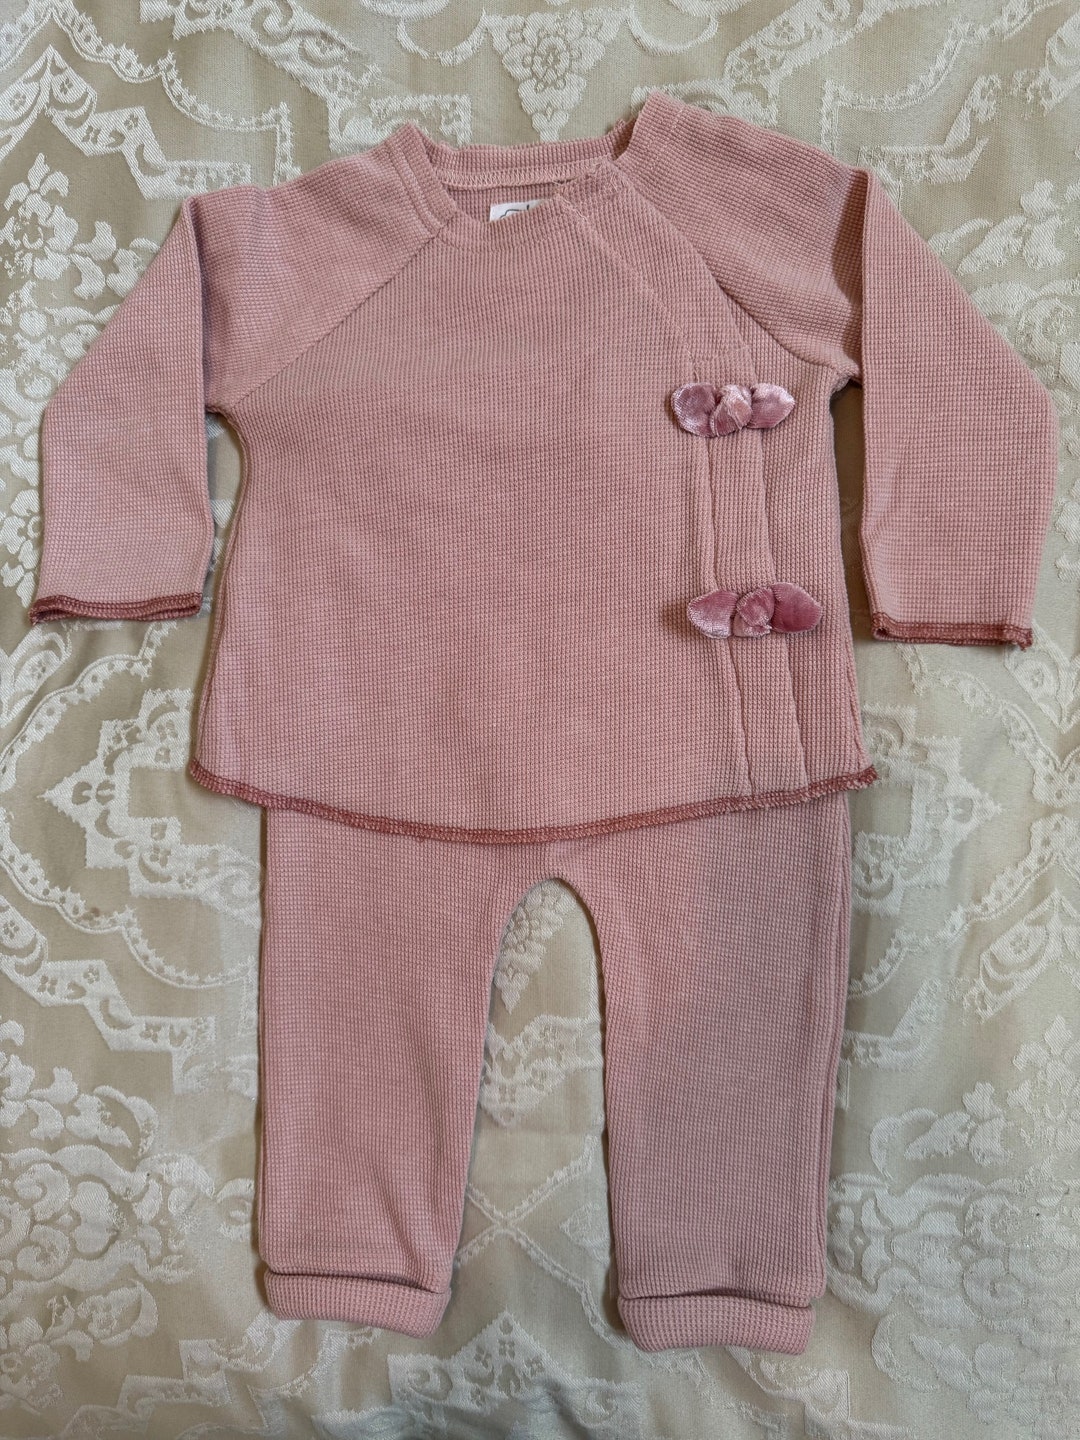 Baby Girl's 2 Piece Pink Pant Set Perfect for Spring and Easter 6-9 ...